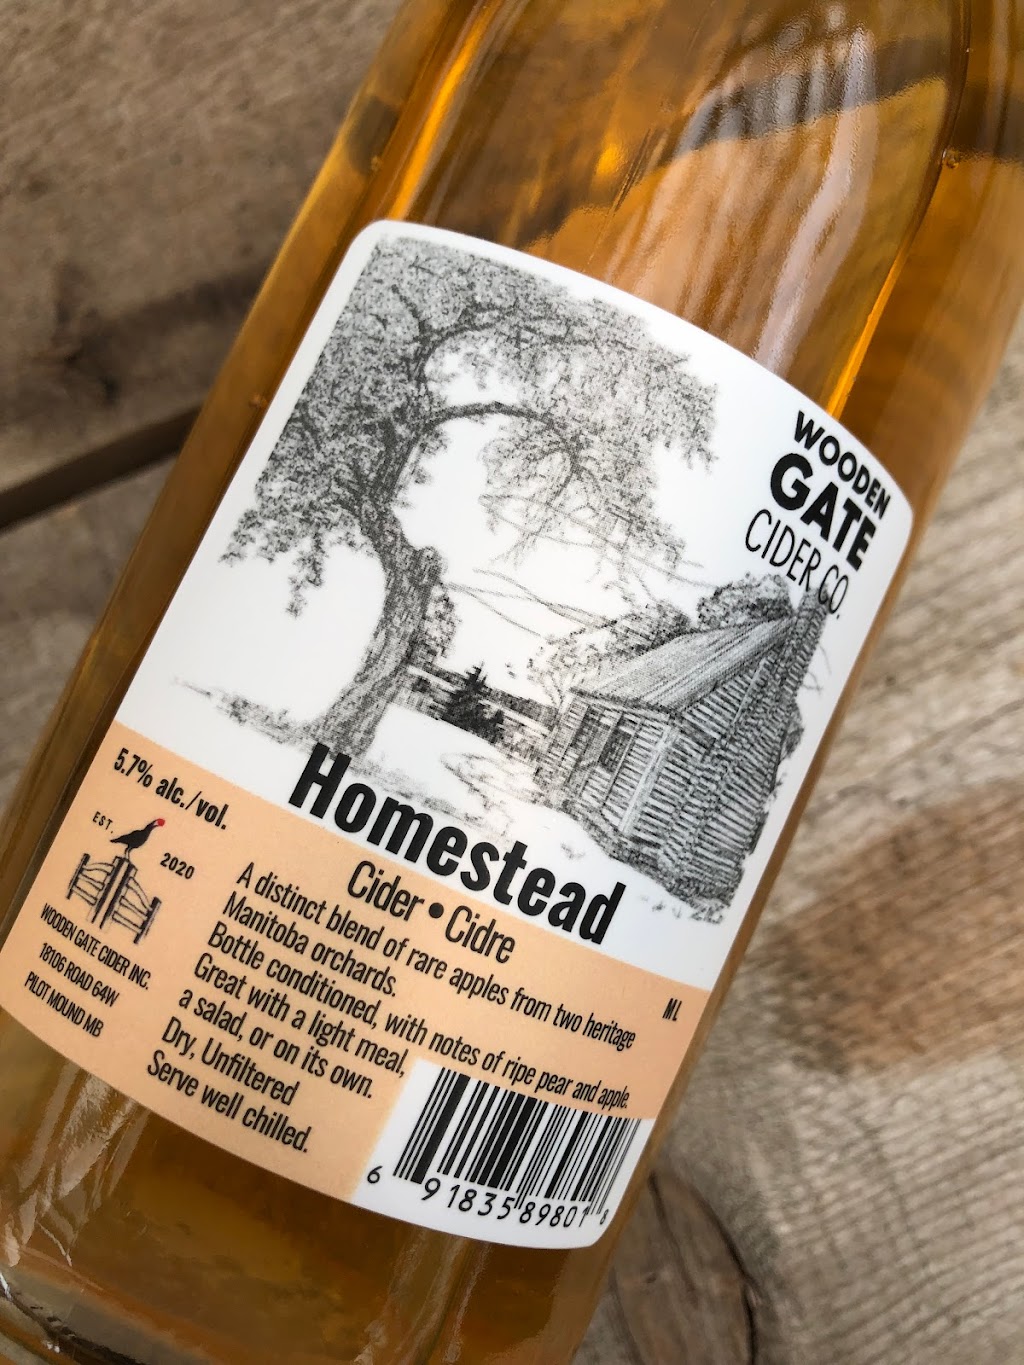 Wooden Gate Cider | 18106 Rd 64 W, Pilot Mound, MB R0G 1P0, Canada | Phone: (431) 515-0036